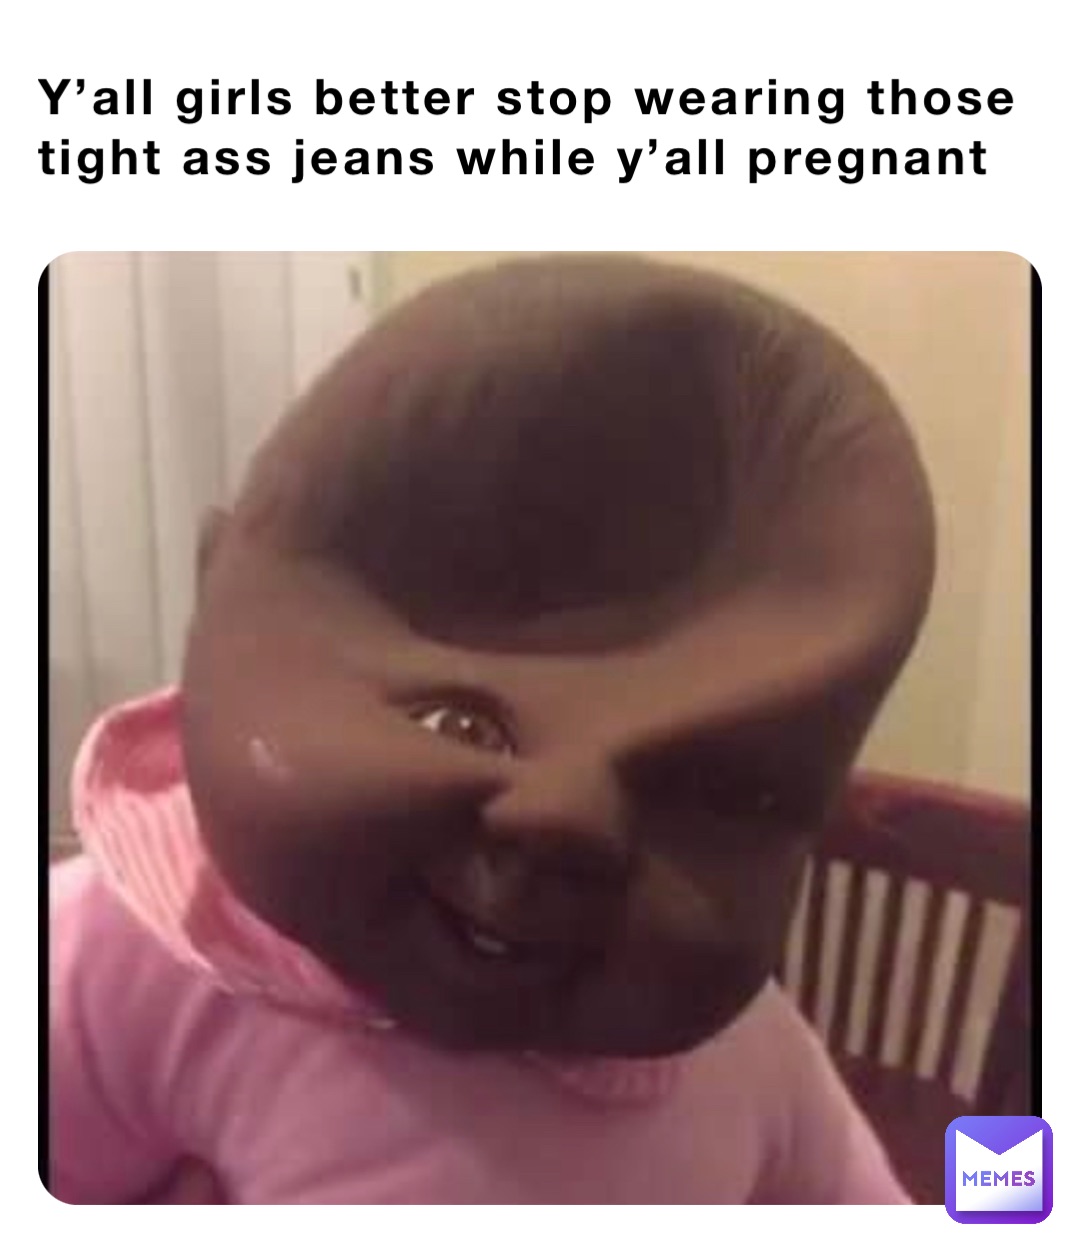 Y’all girls better stop wearing those tight ass jeans while y’all pregnant